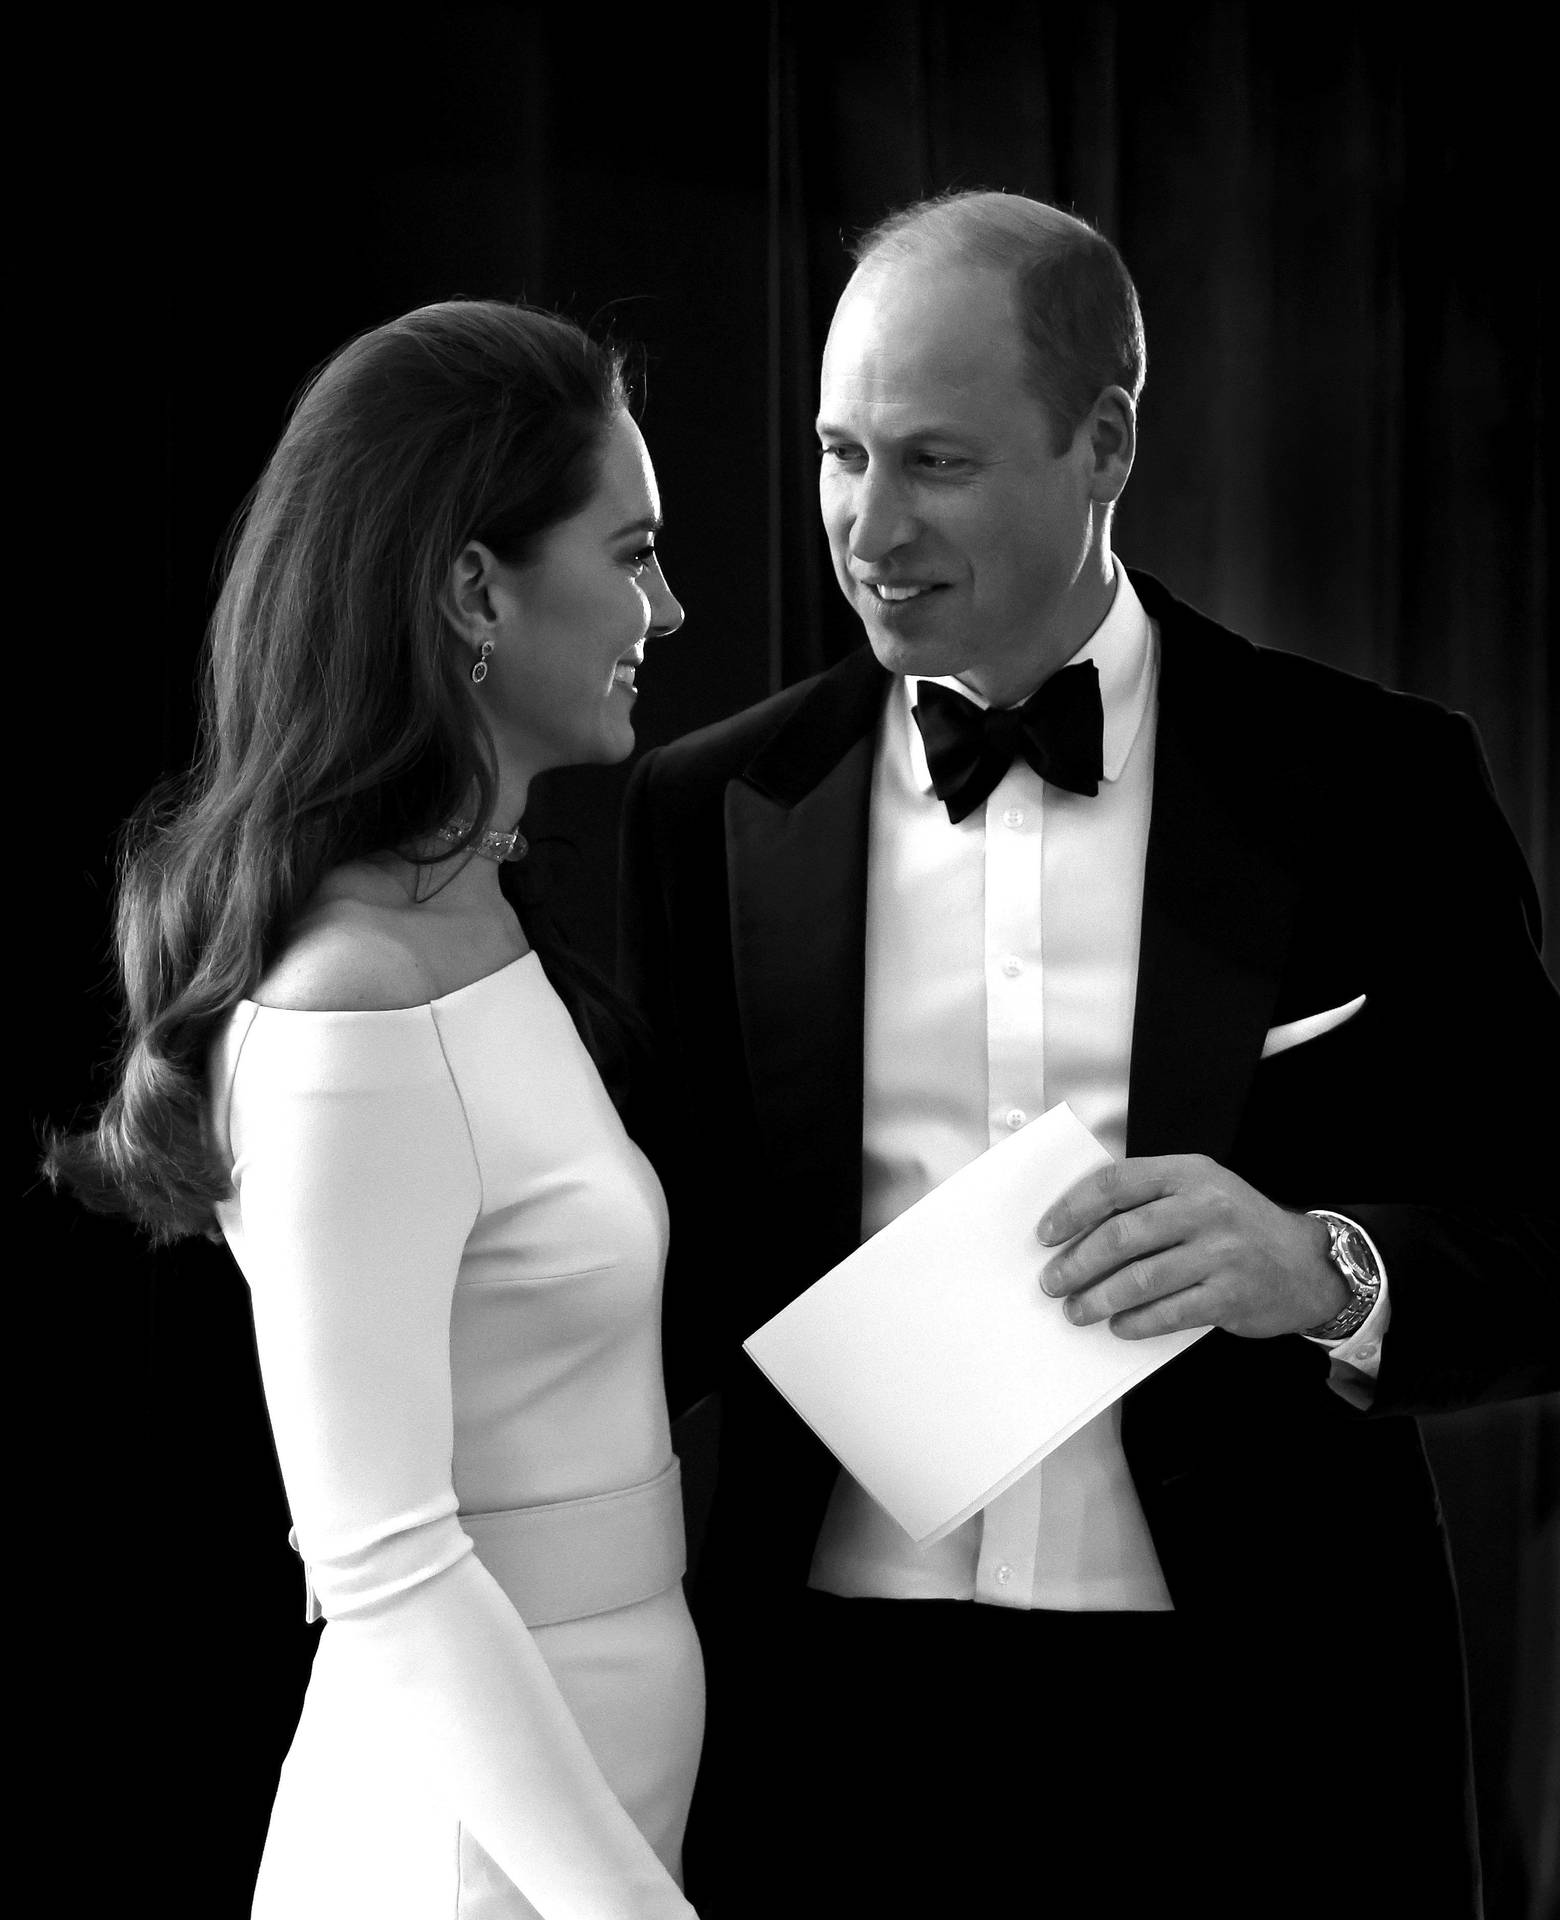 Monochrome Prince William And Kate Middleton